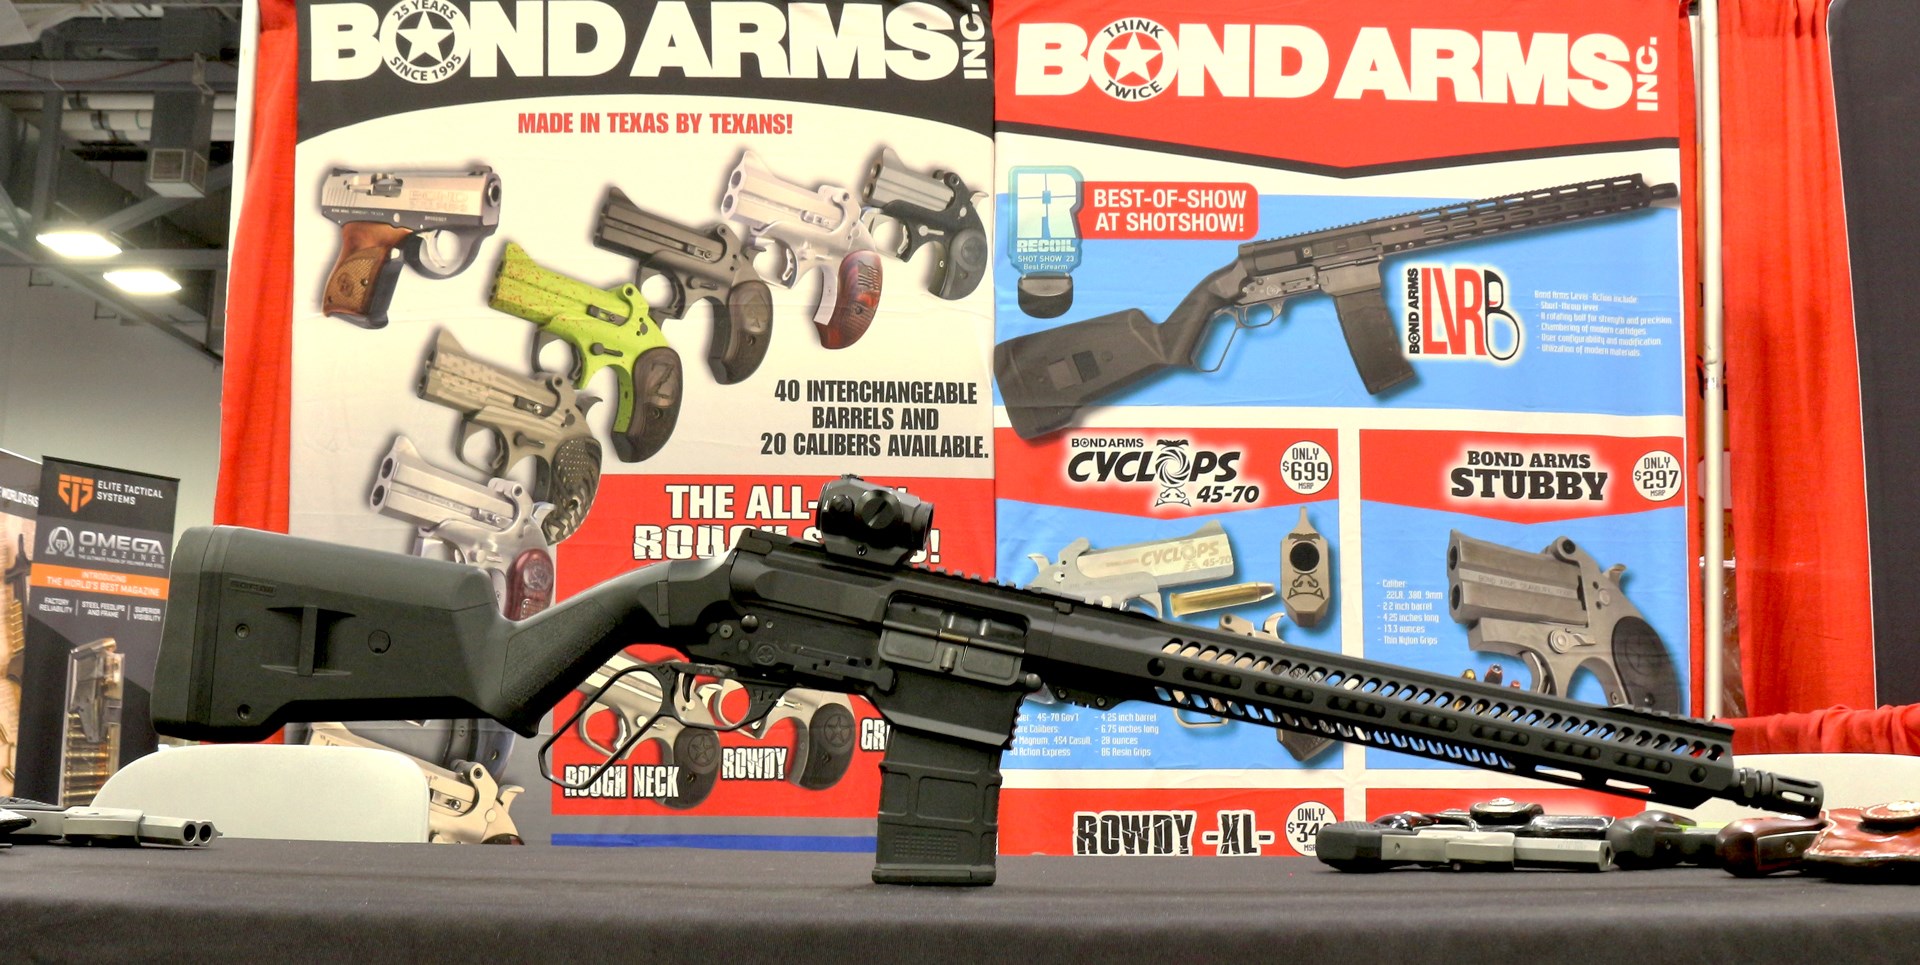 bond arms lever-action LVRB carbine rifle shown on table with marketing information background